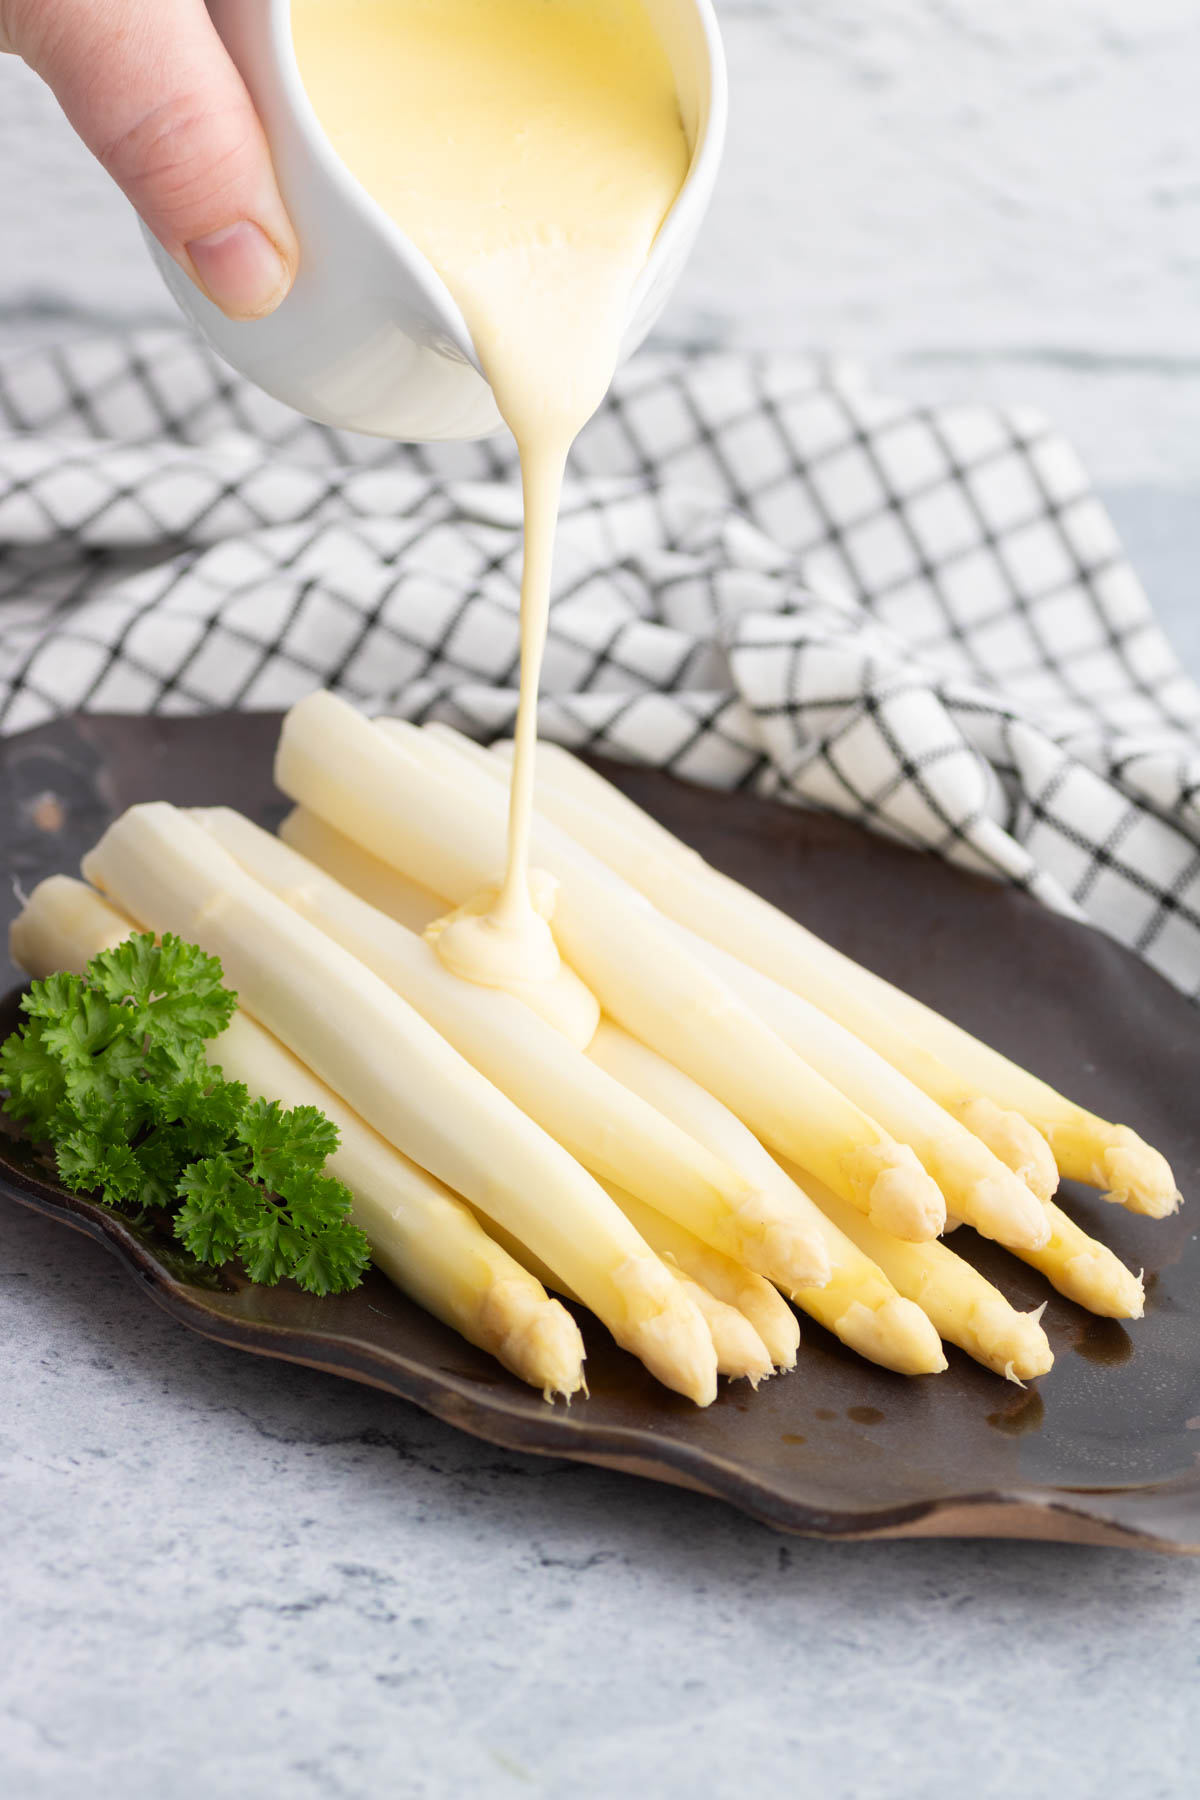 Light yellow Hollandaise sauce being poured on a bunch of steamed white asparagus.